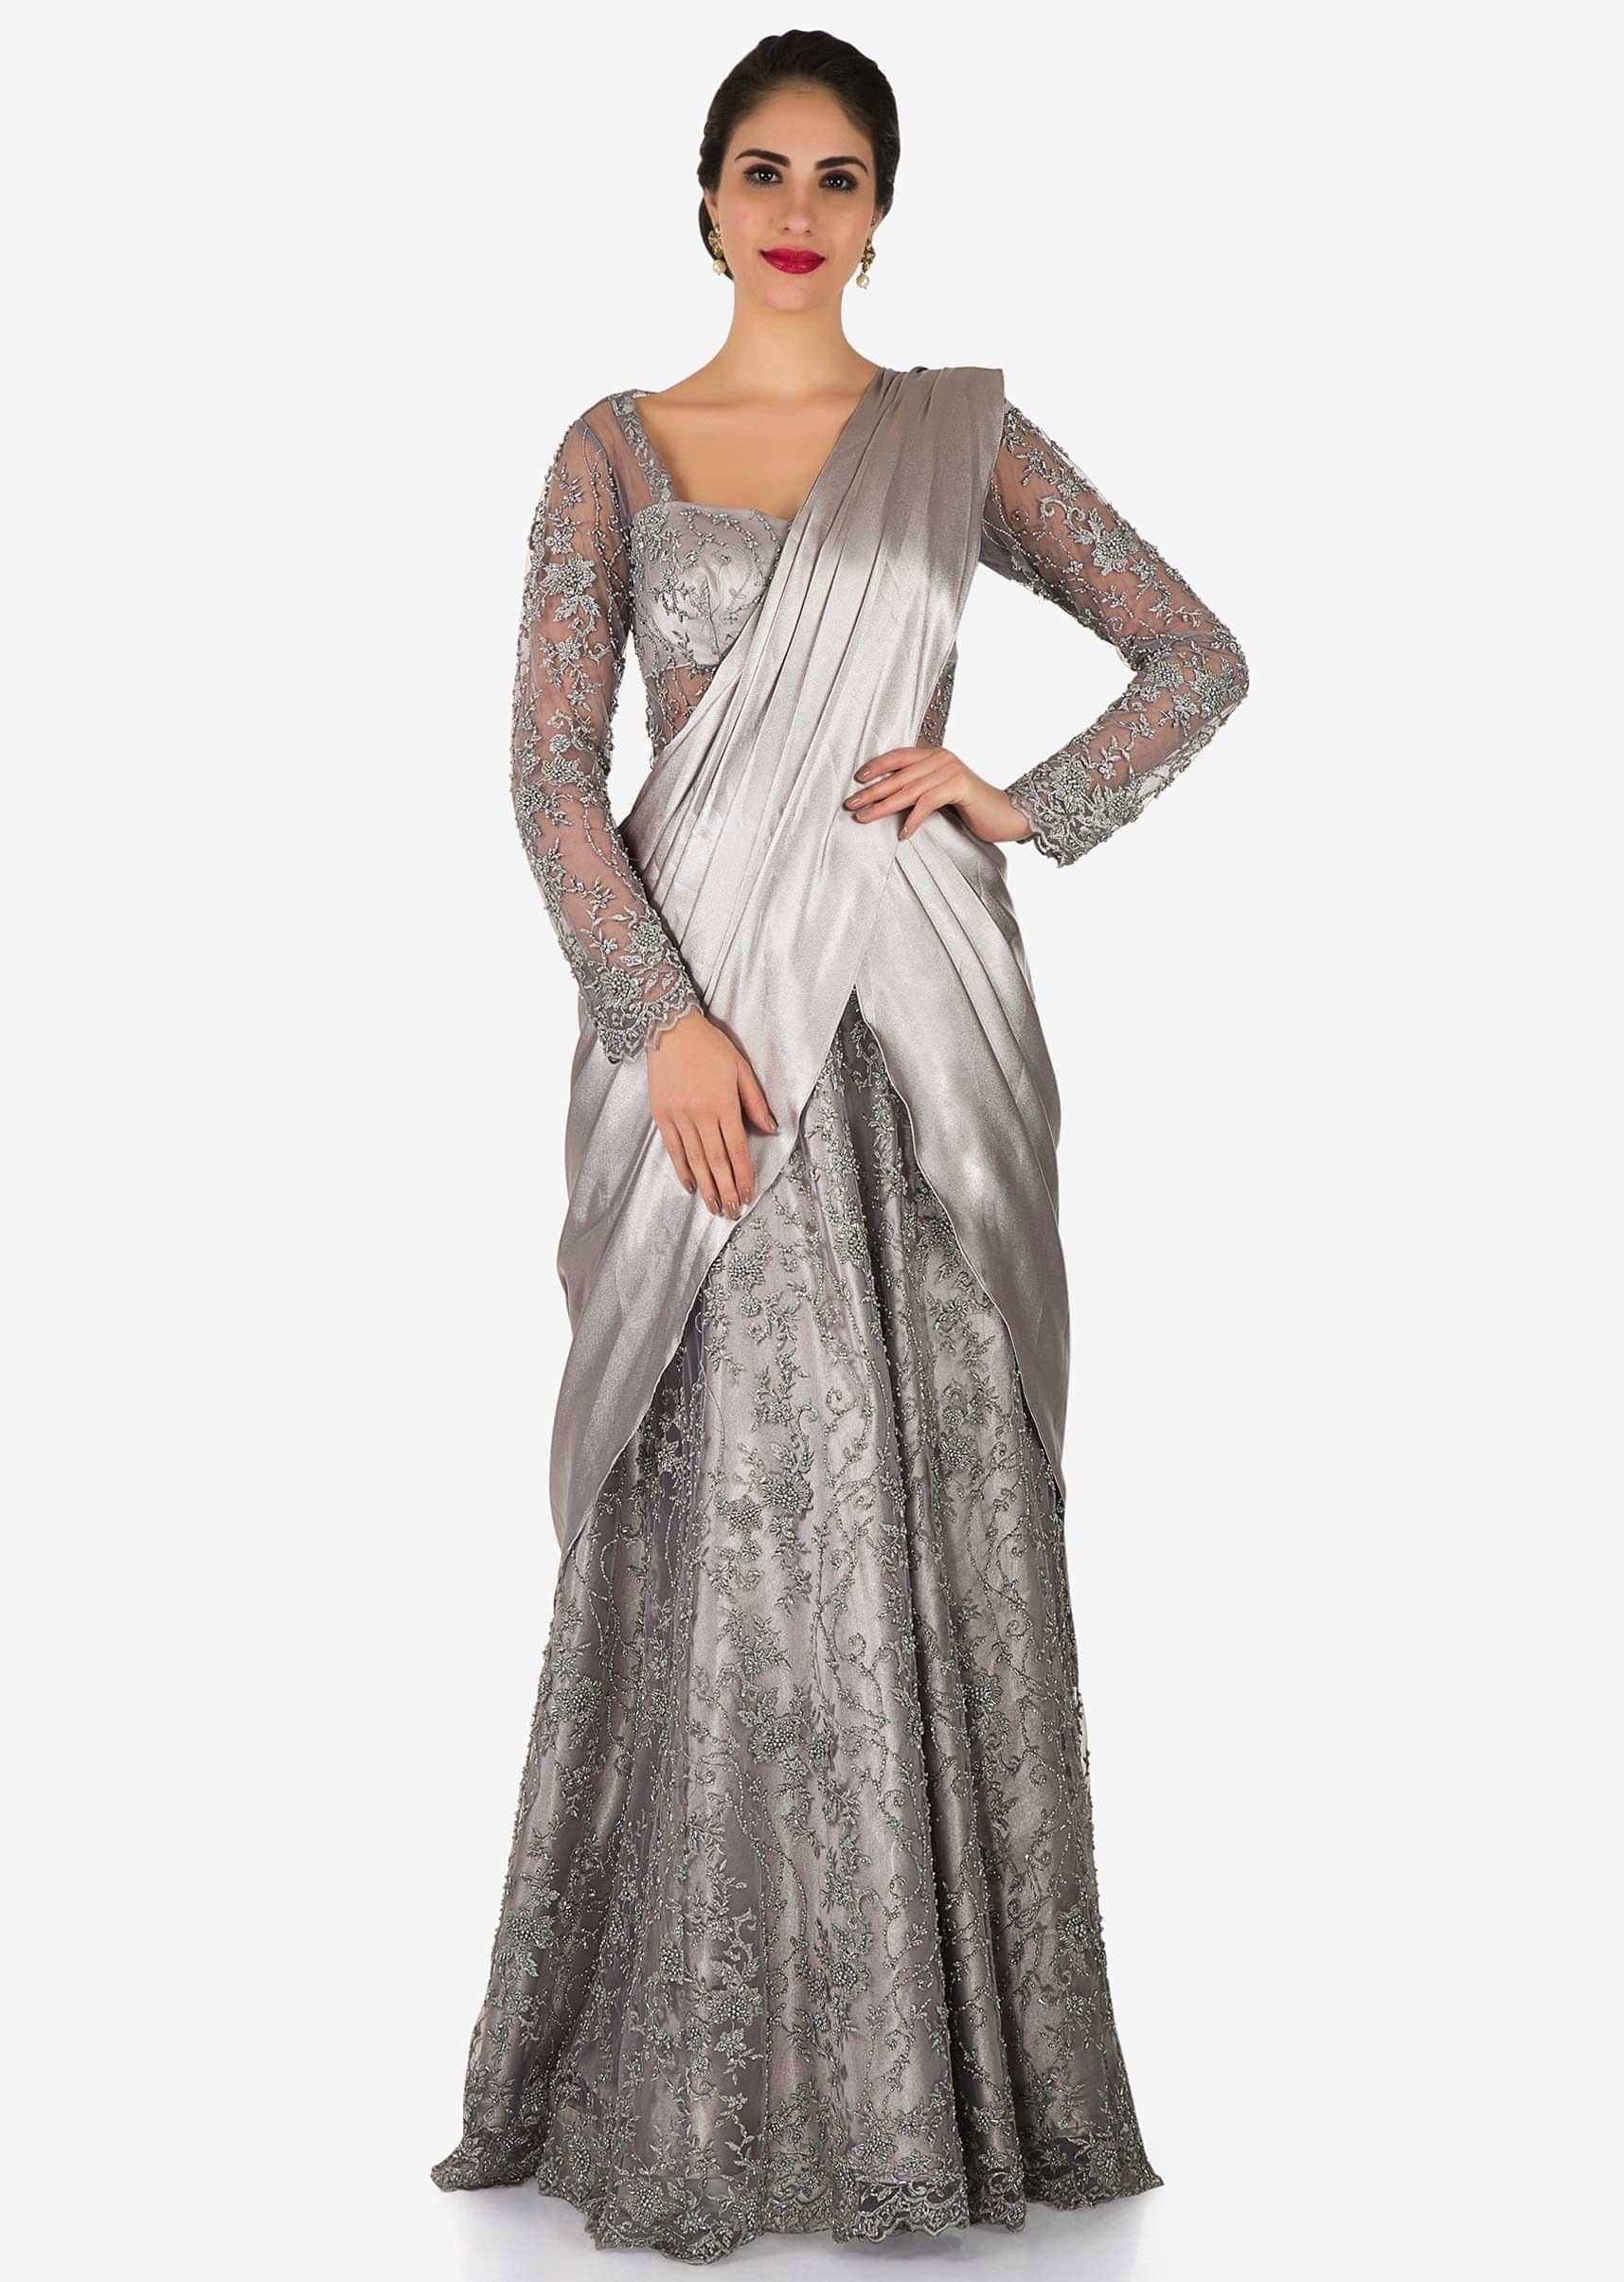 Grey net pre-stitched gown saree featuring the resham and cut dana work only on Kalki